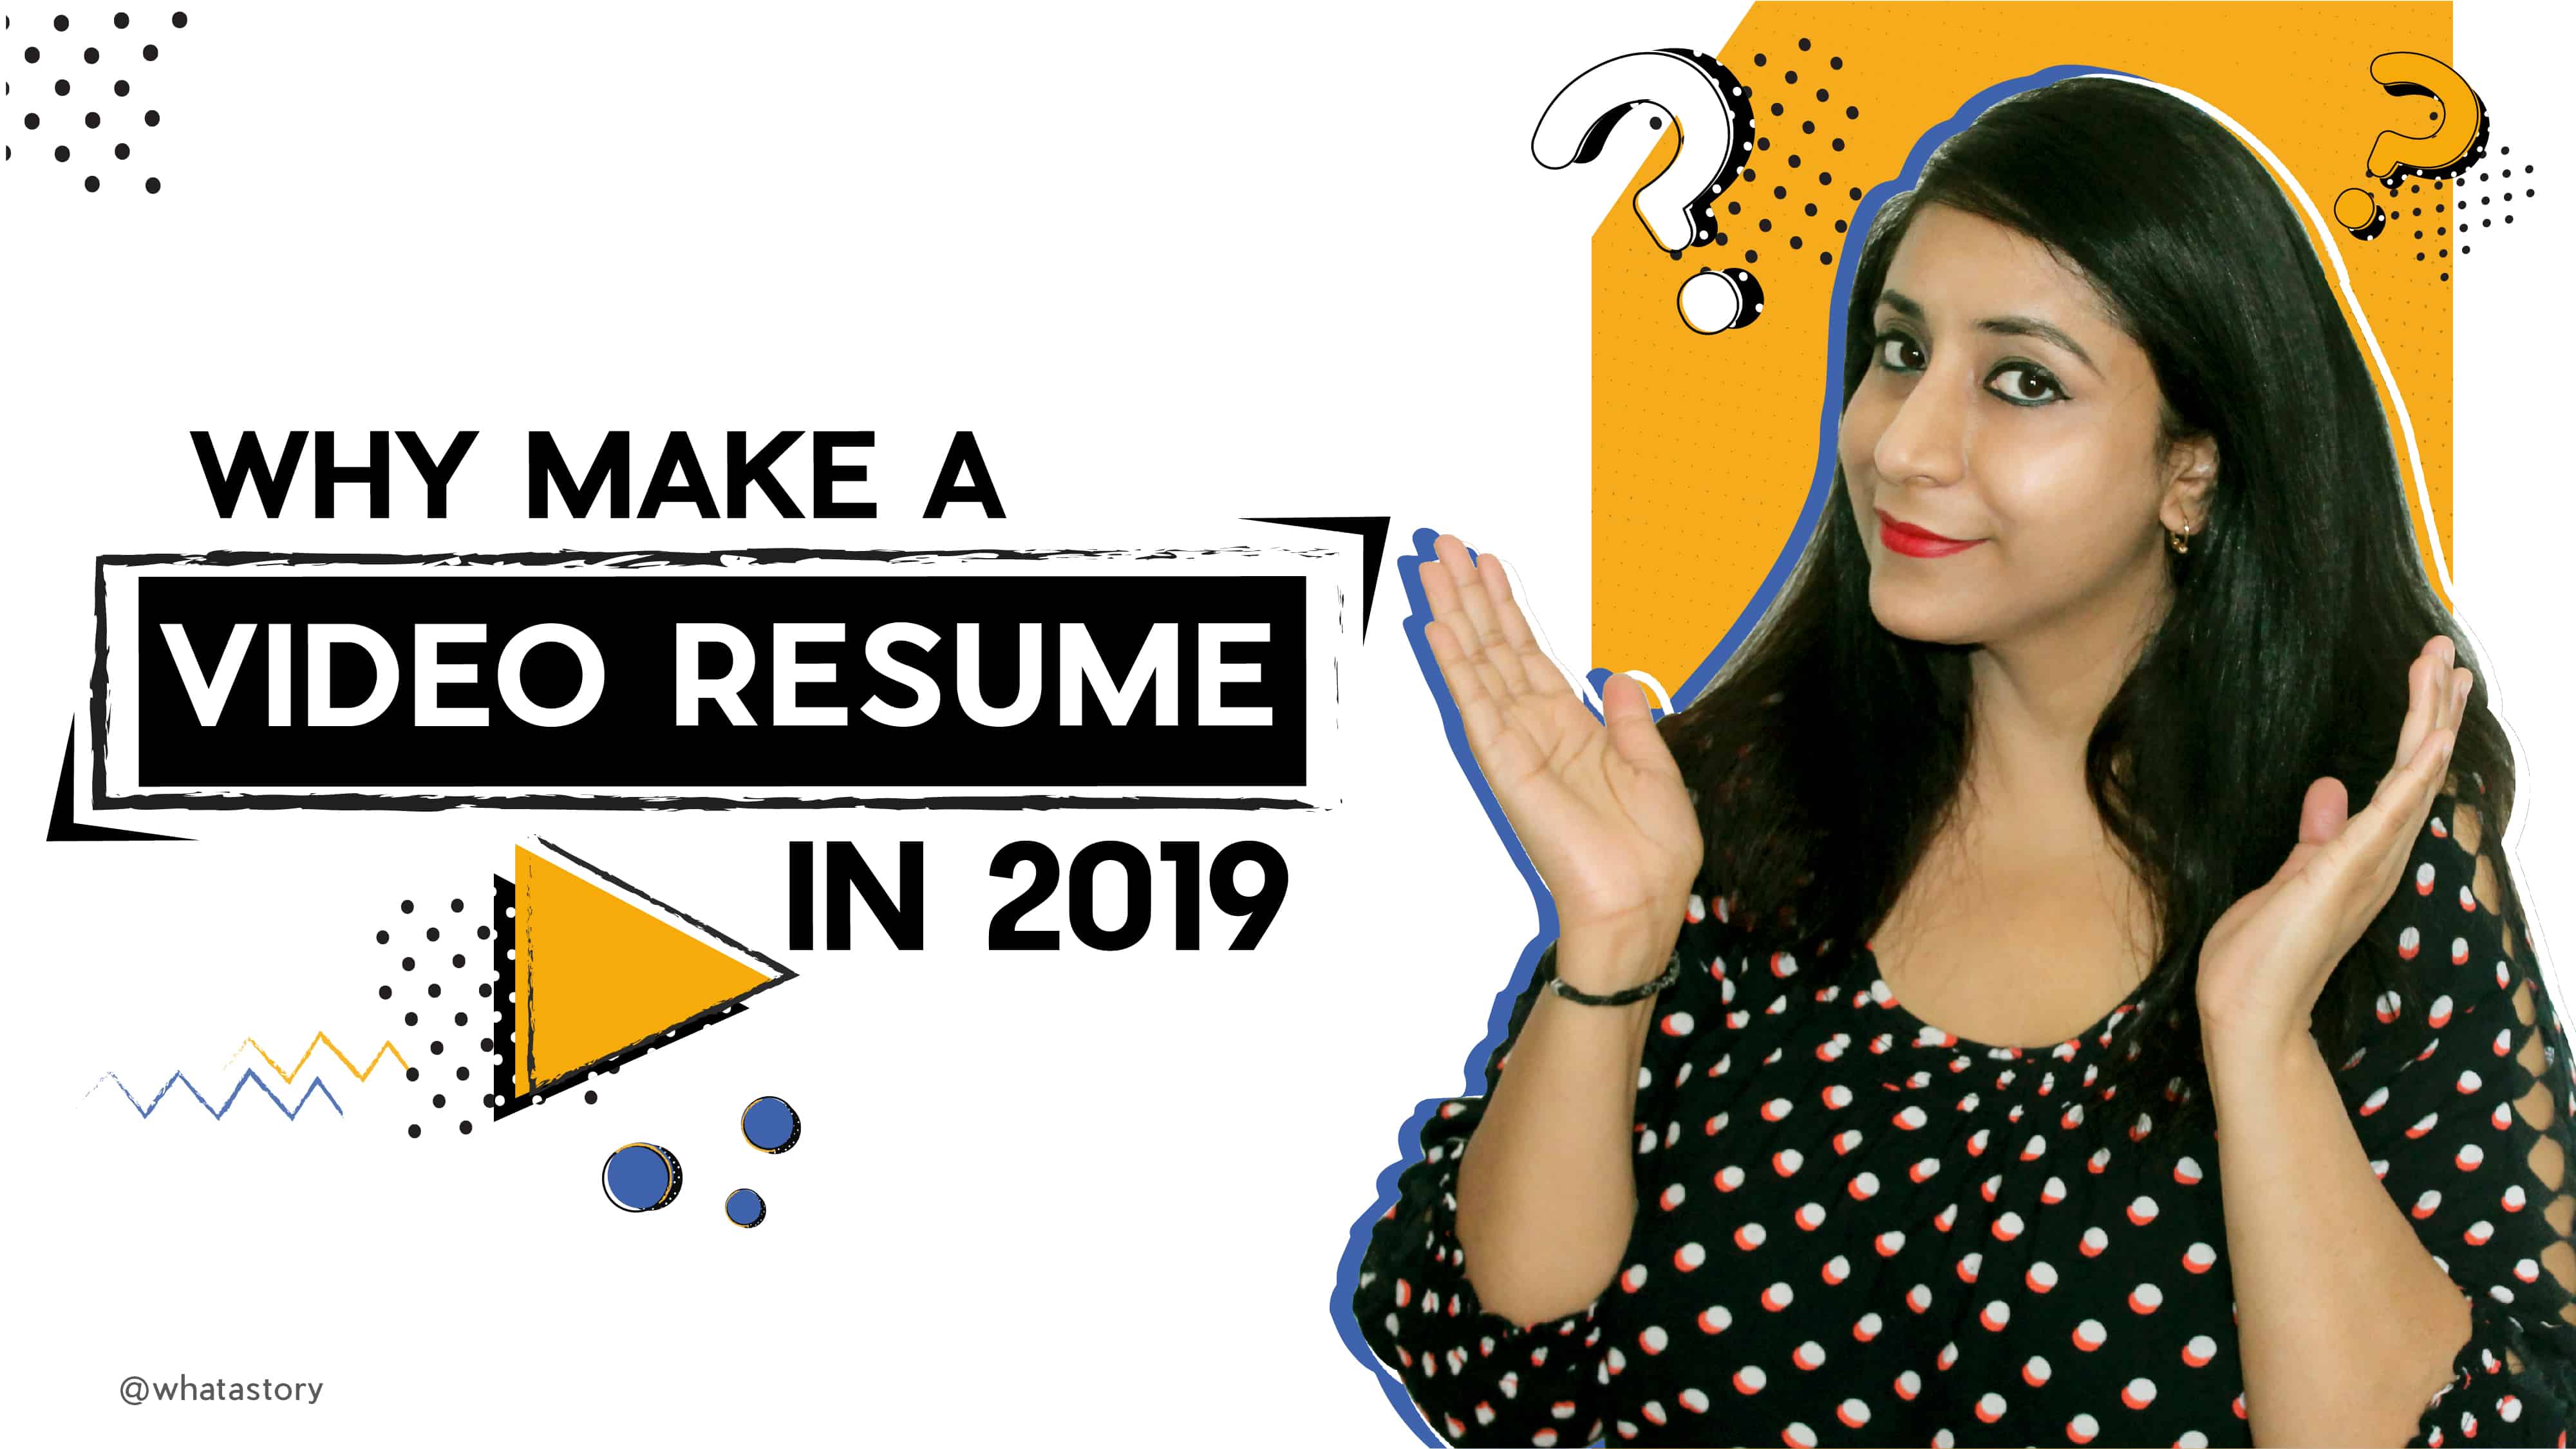 Why make a Video Resume in 2019